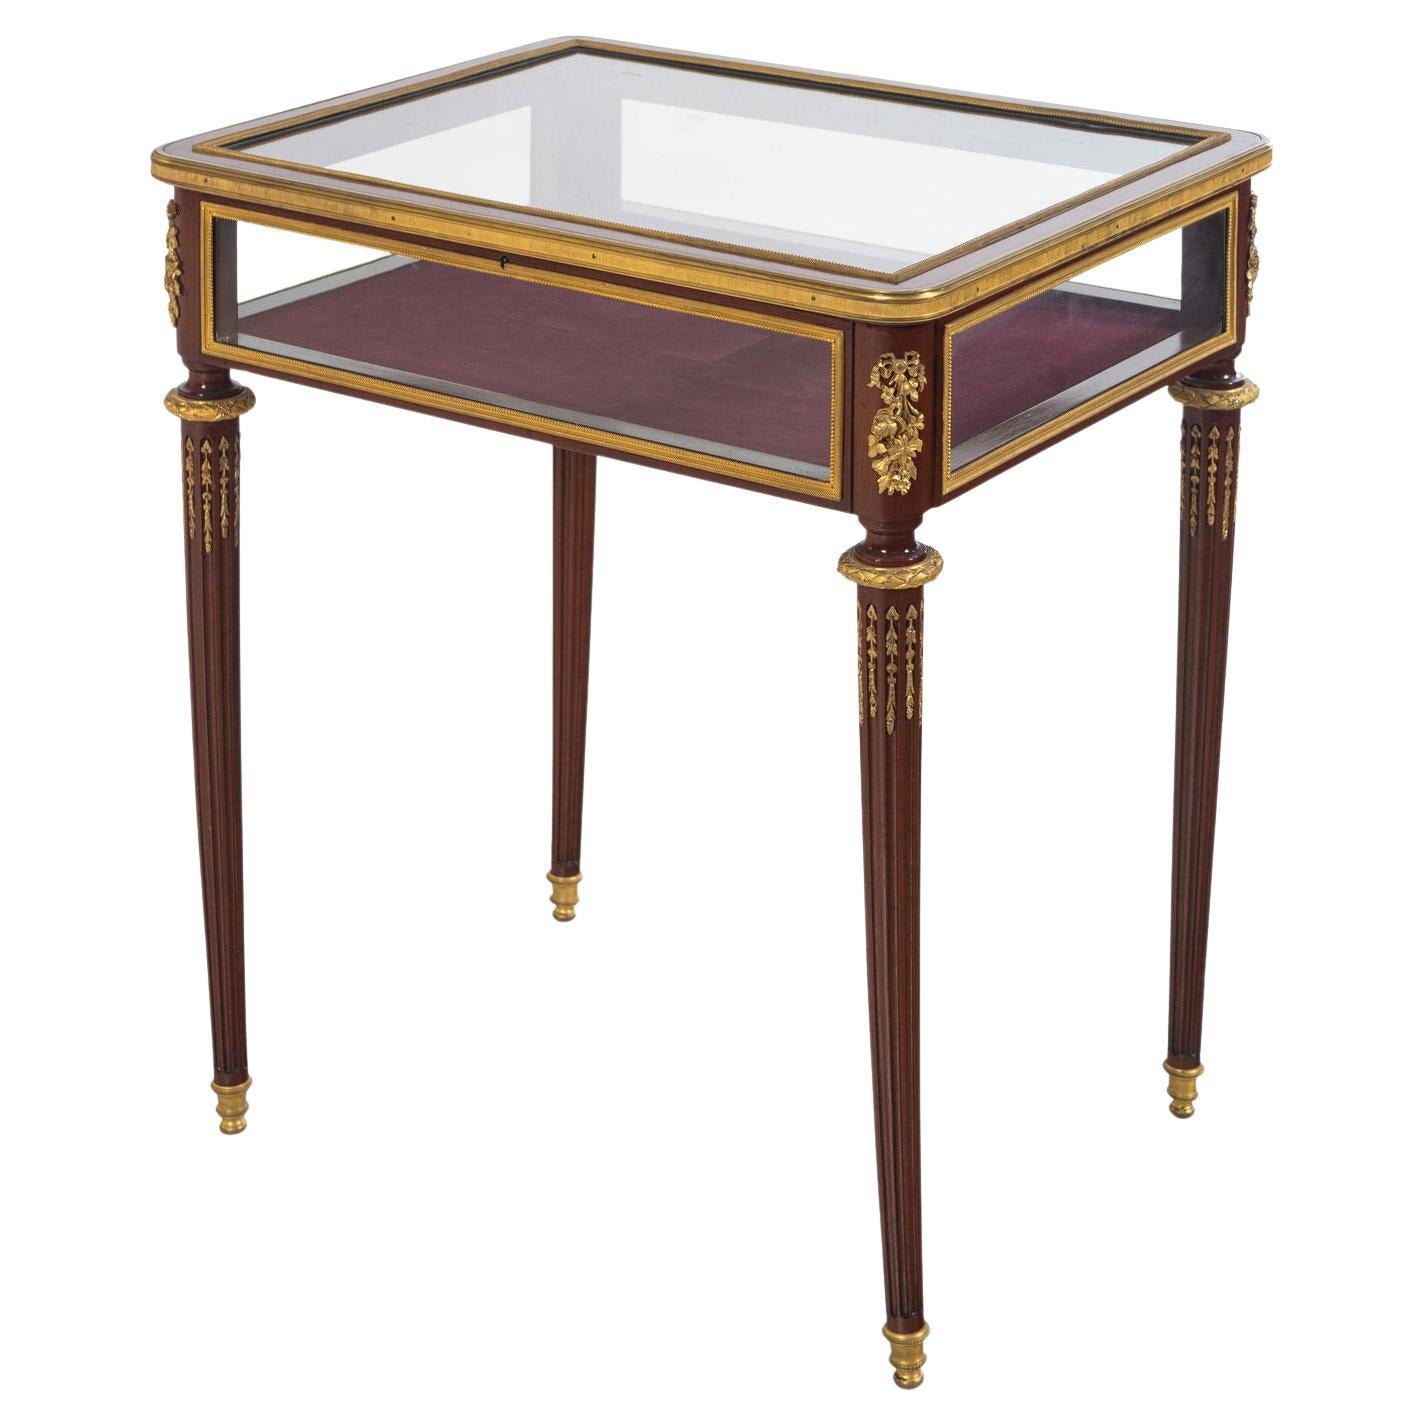 A French Louis XVI style Ormolu-Mounted Mahogany Vitrine Table, C. 1880, attributed to Paul Sormani.

Very good quality, nice ormolu mounts throughout, presents very well. 

Measures: 30